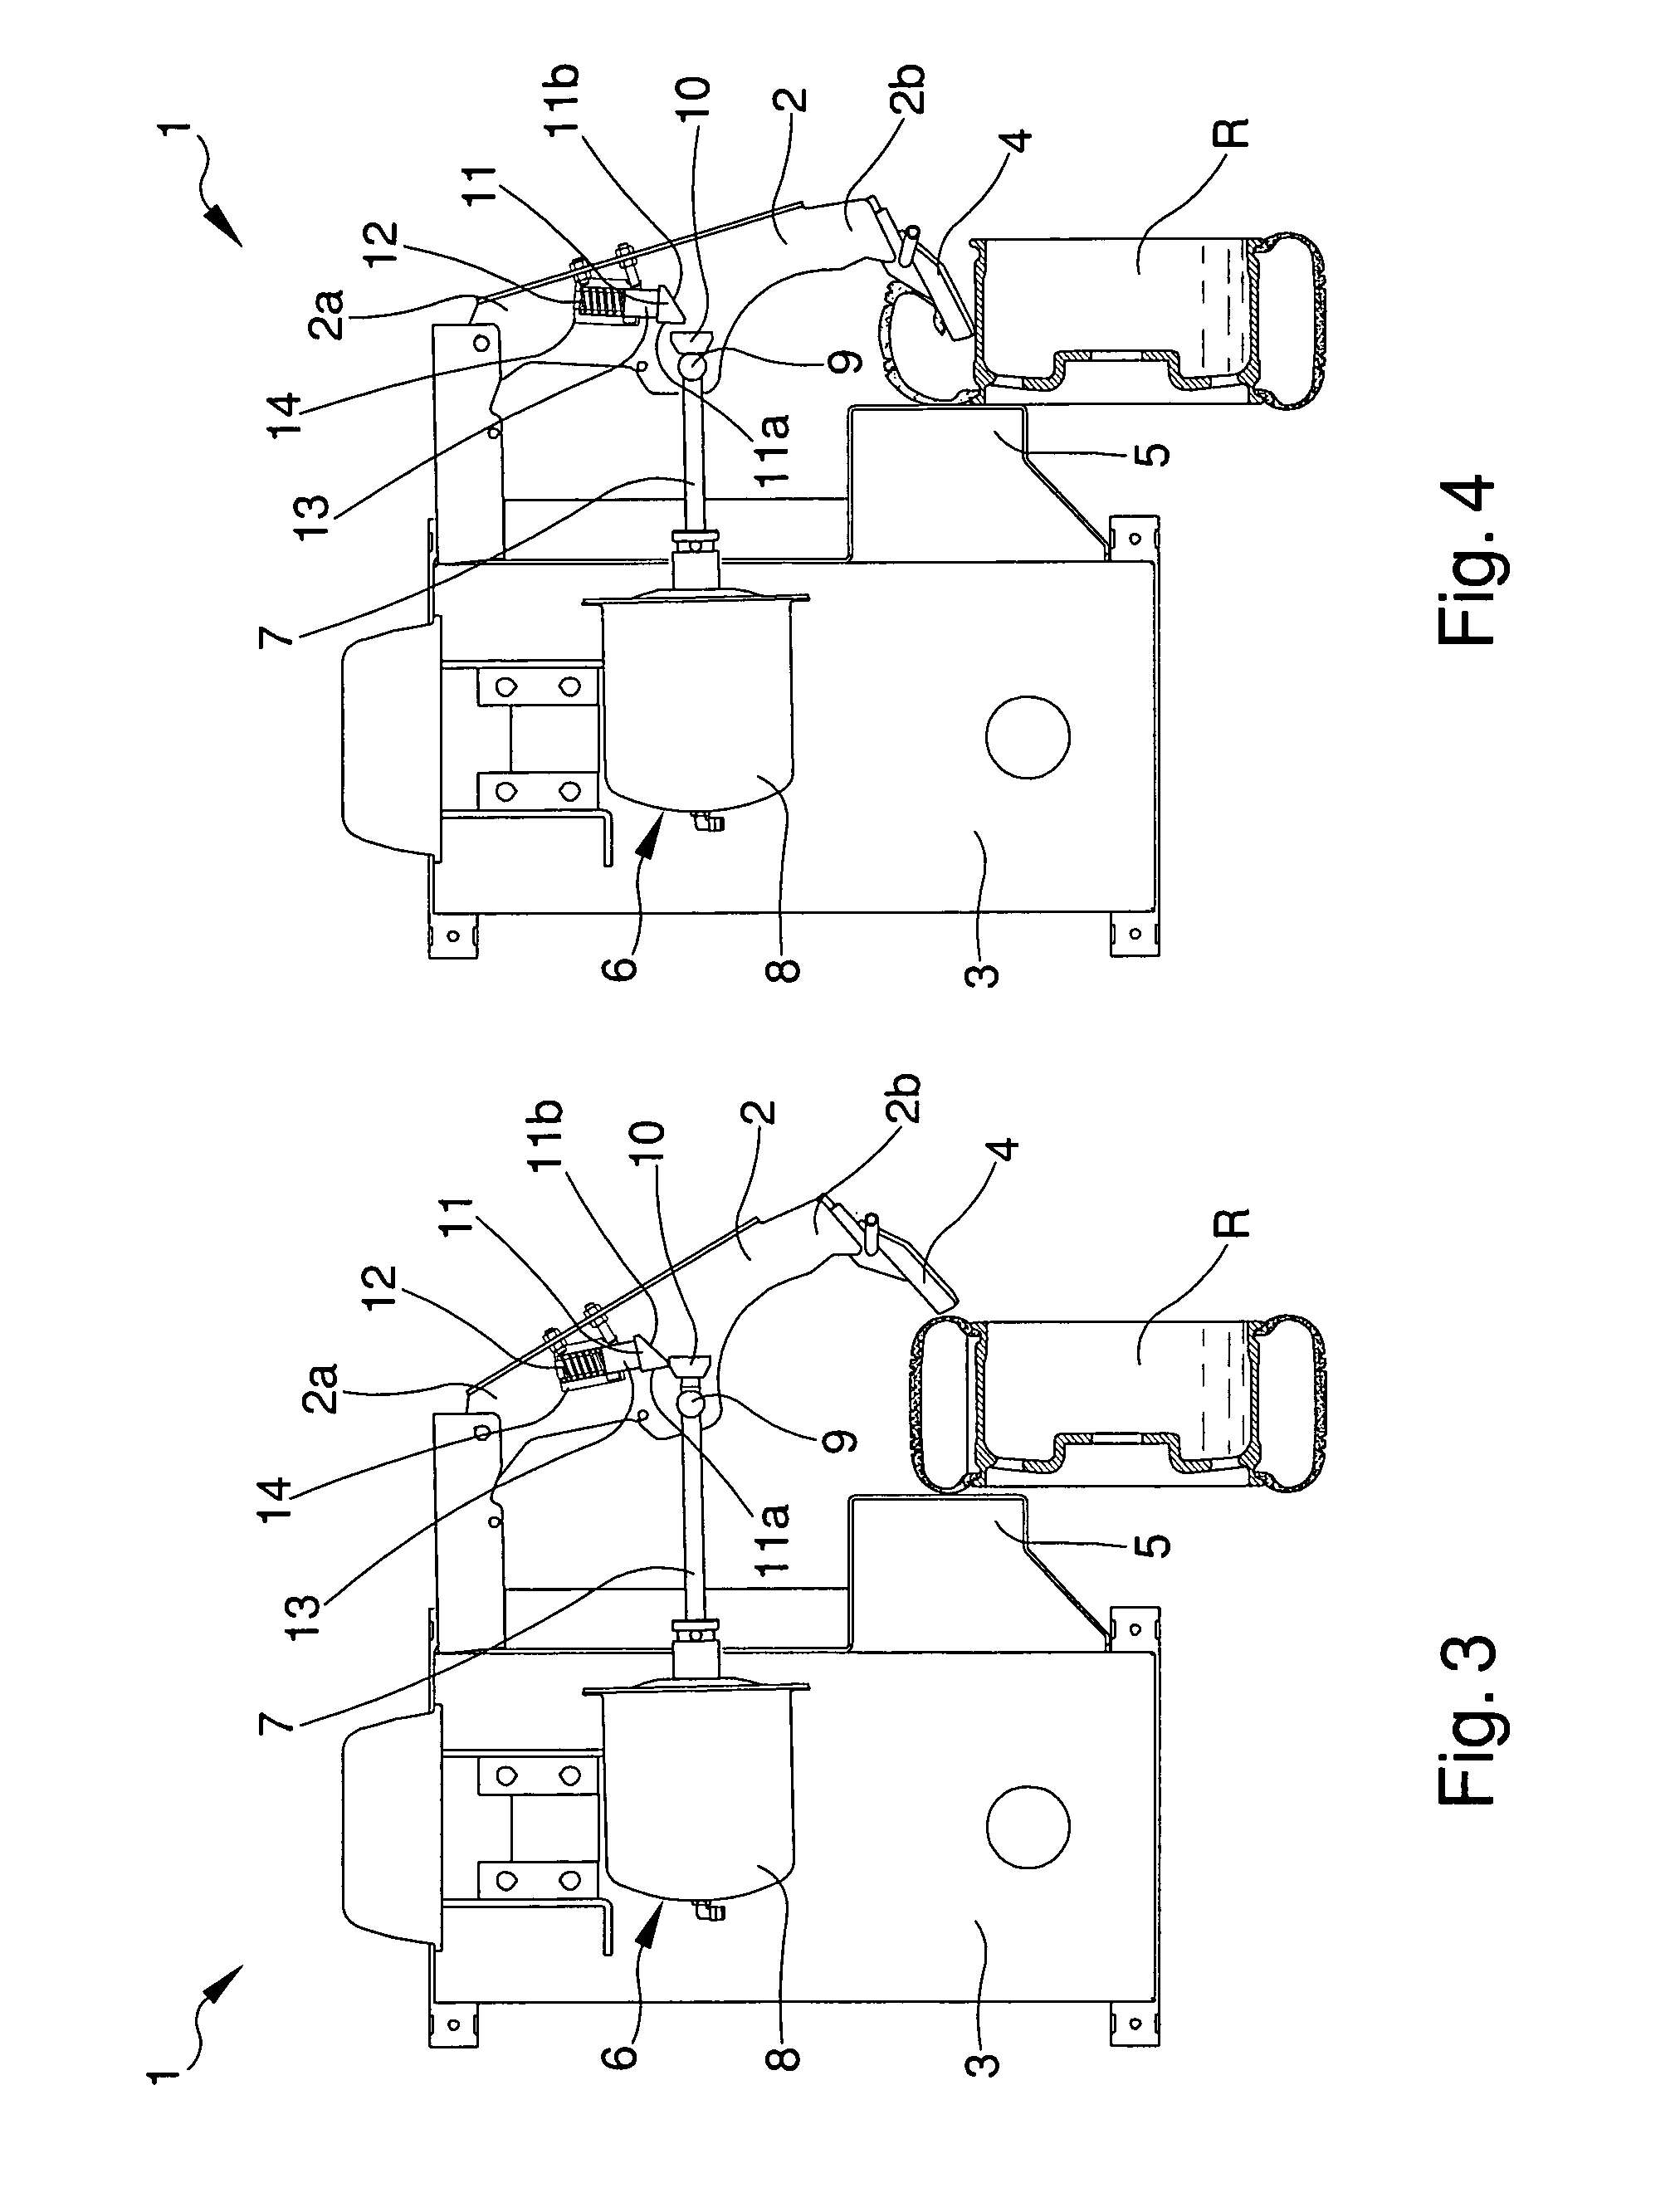 Bead breaking unit for tire changing machines